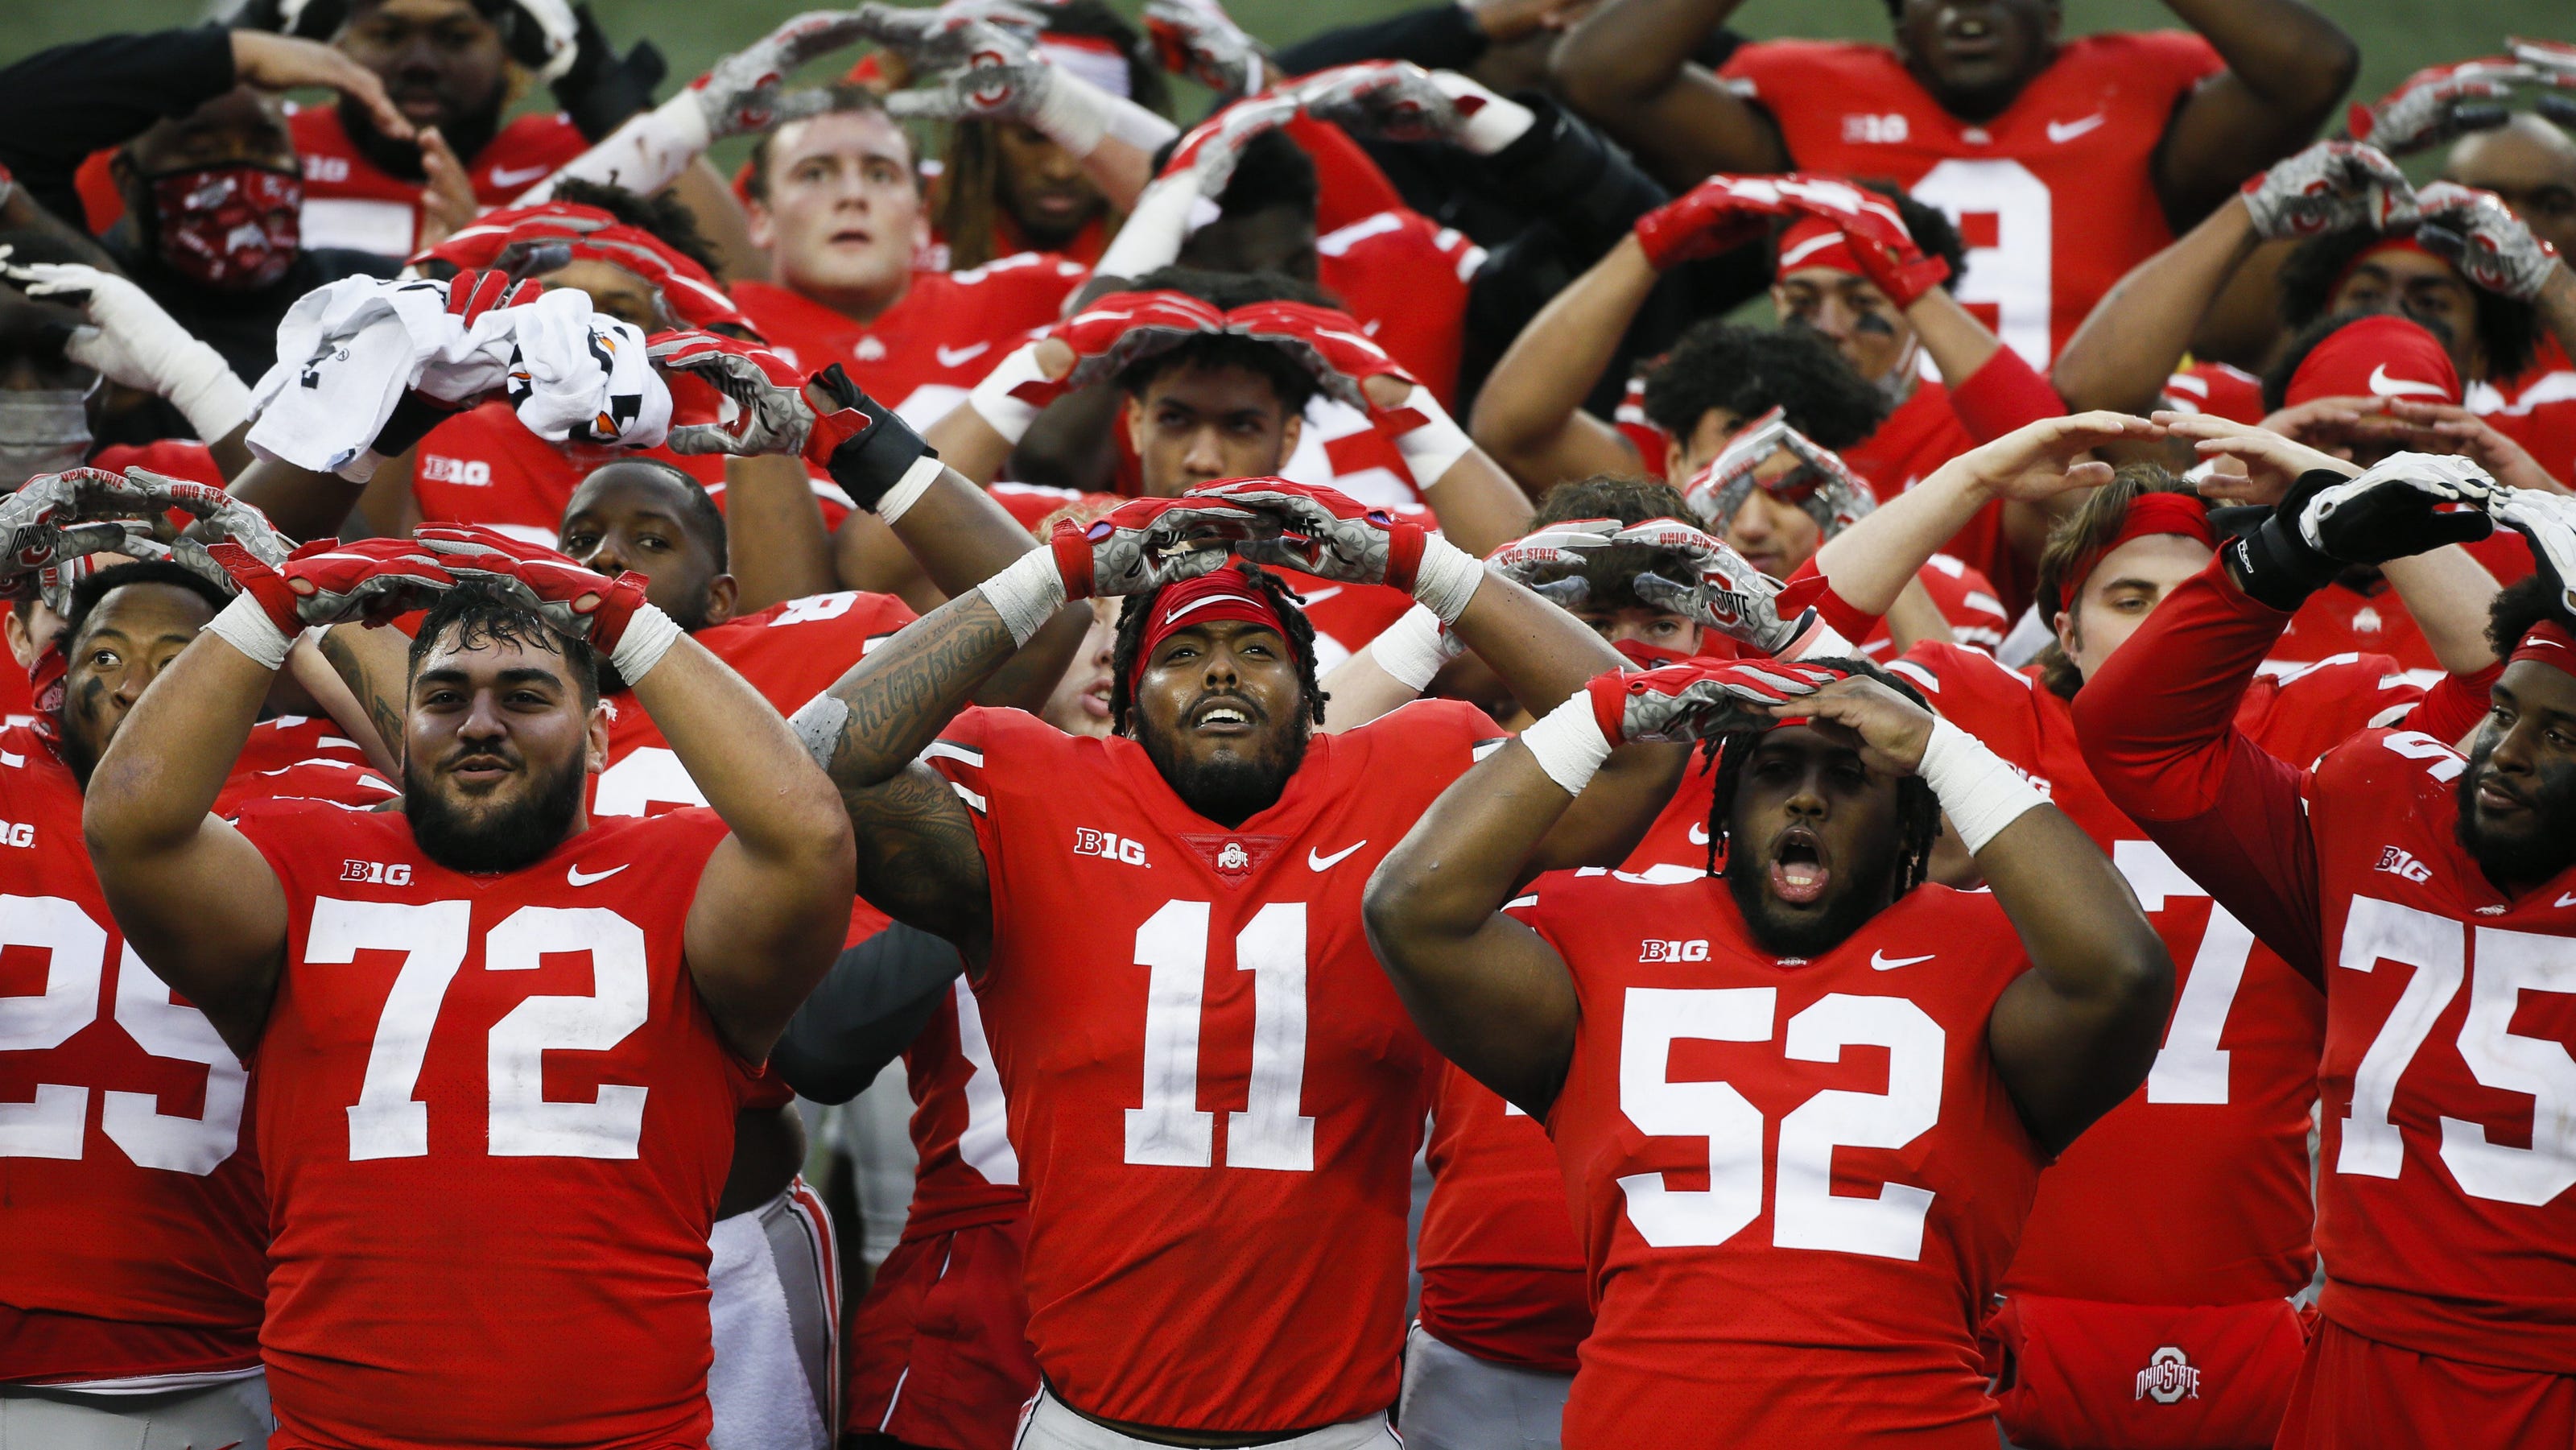 Ohio State football: Buckeyes No. 4 in first CFP ranking